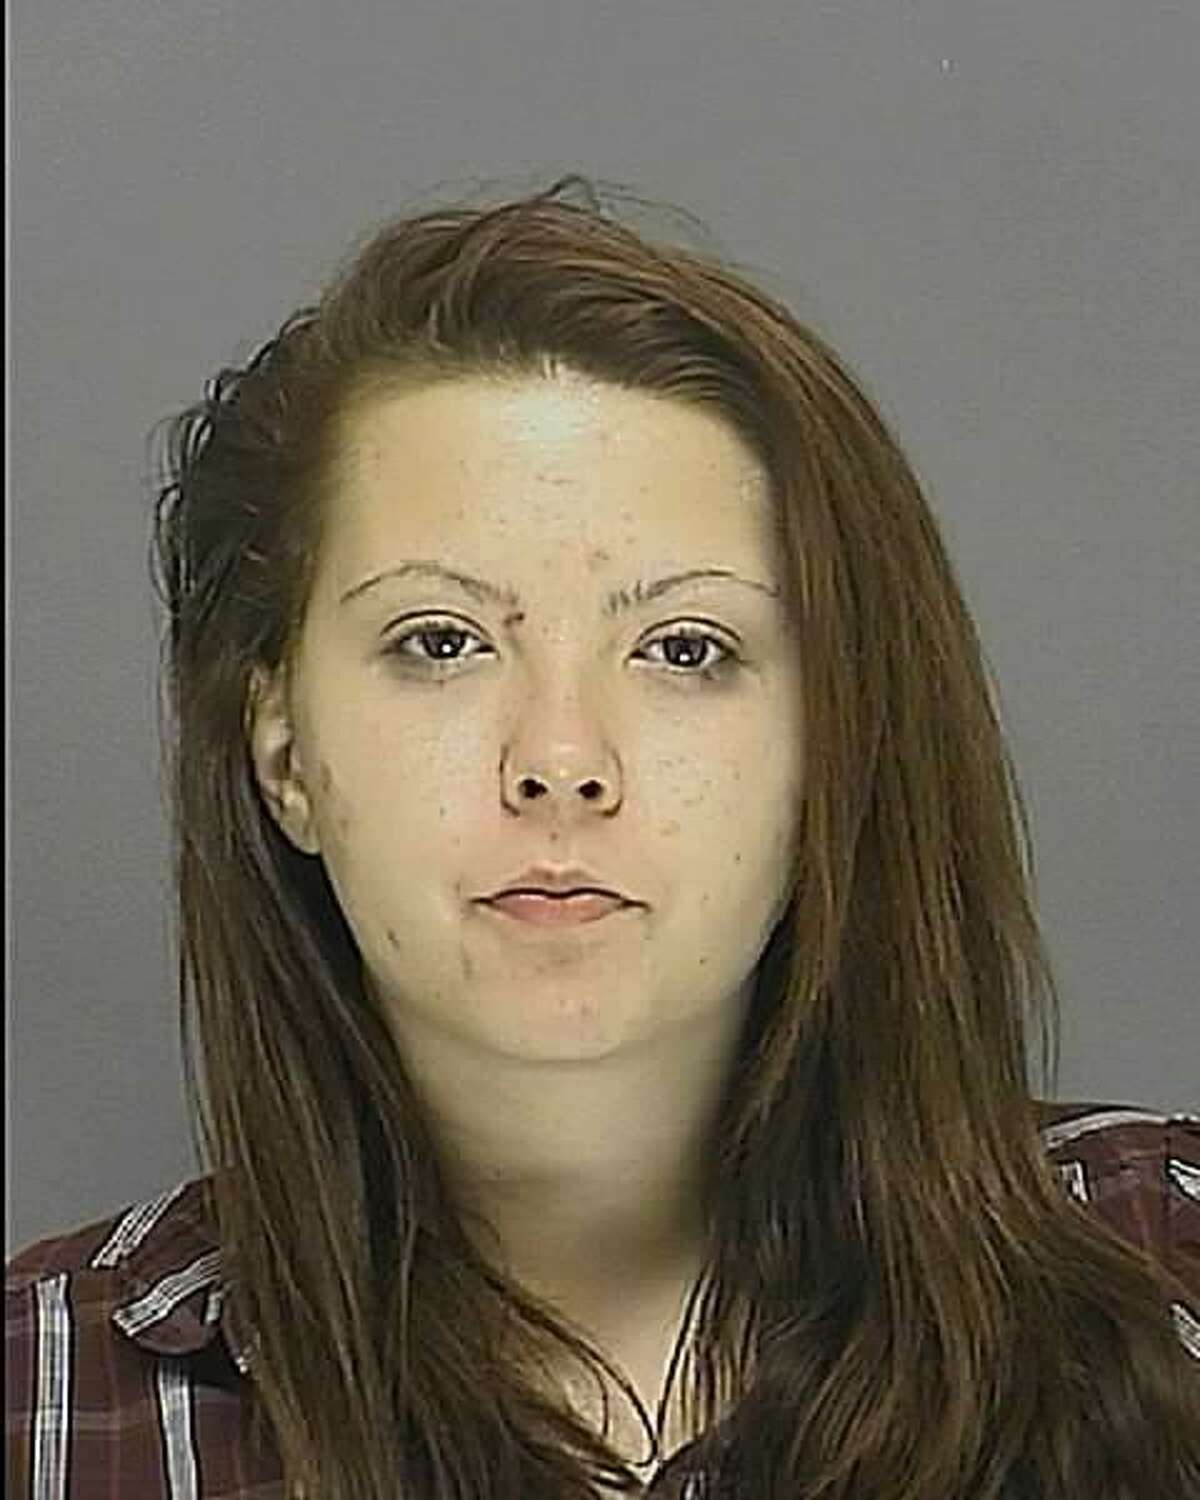 Suspect: Brigitte Matzke, 25 Charge: Fleeing or attempting to elude officers Date: August 2011